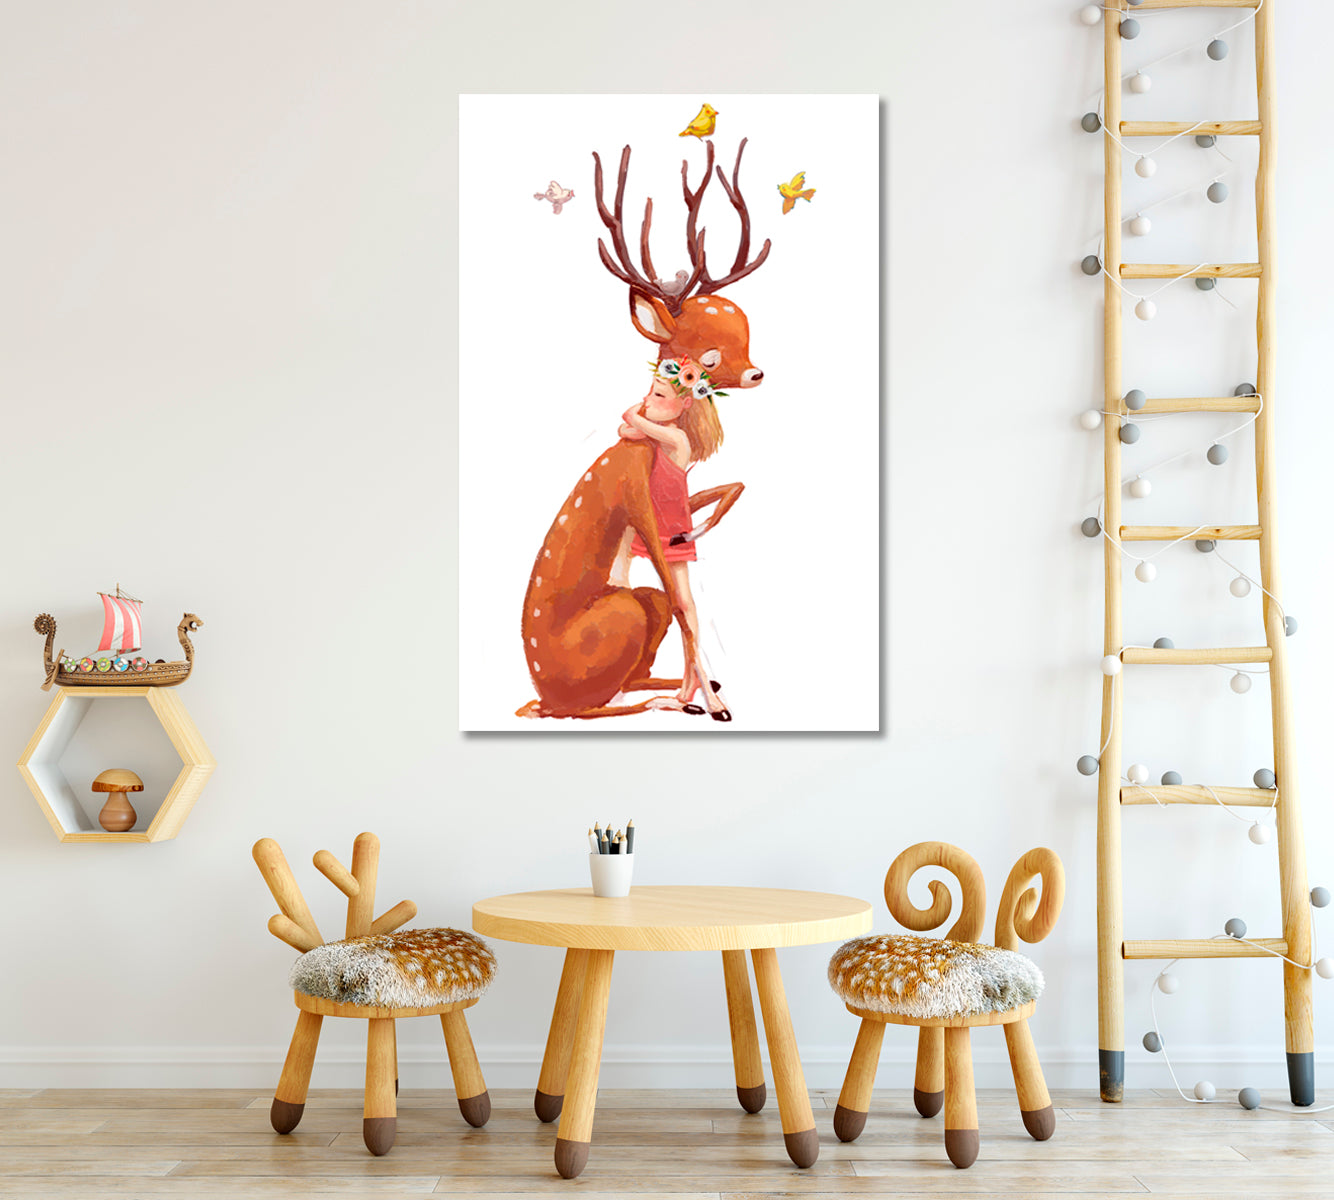 Girl with Deer Canvas Print ArtLexy 1 Panel 16"x24" inches 